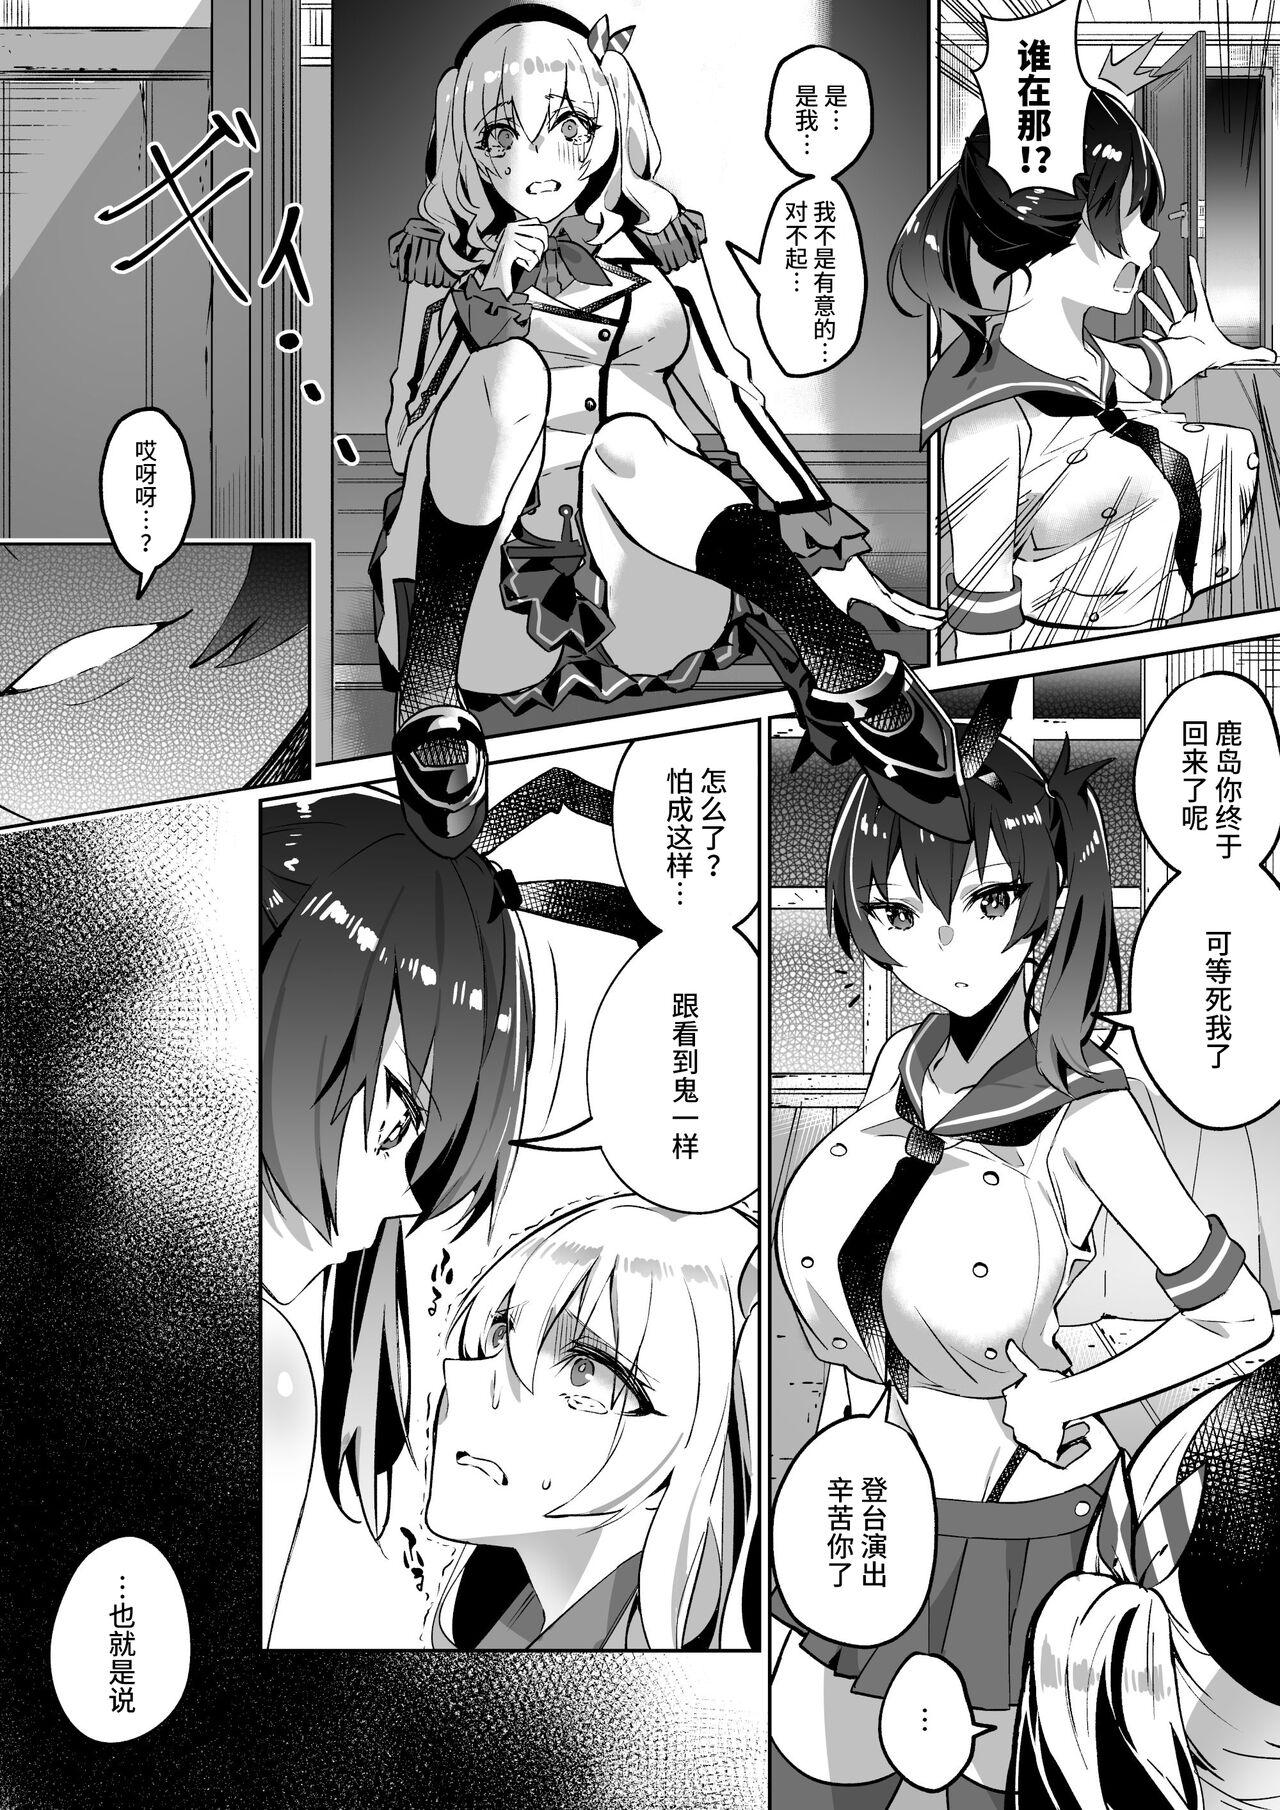 Male 艦これ 加賀&鹿島憑依 - Kantai collection High Heels - Page 4